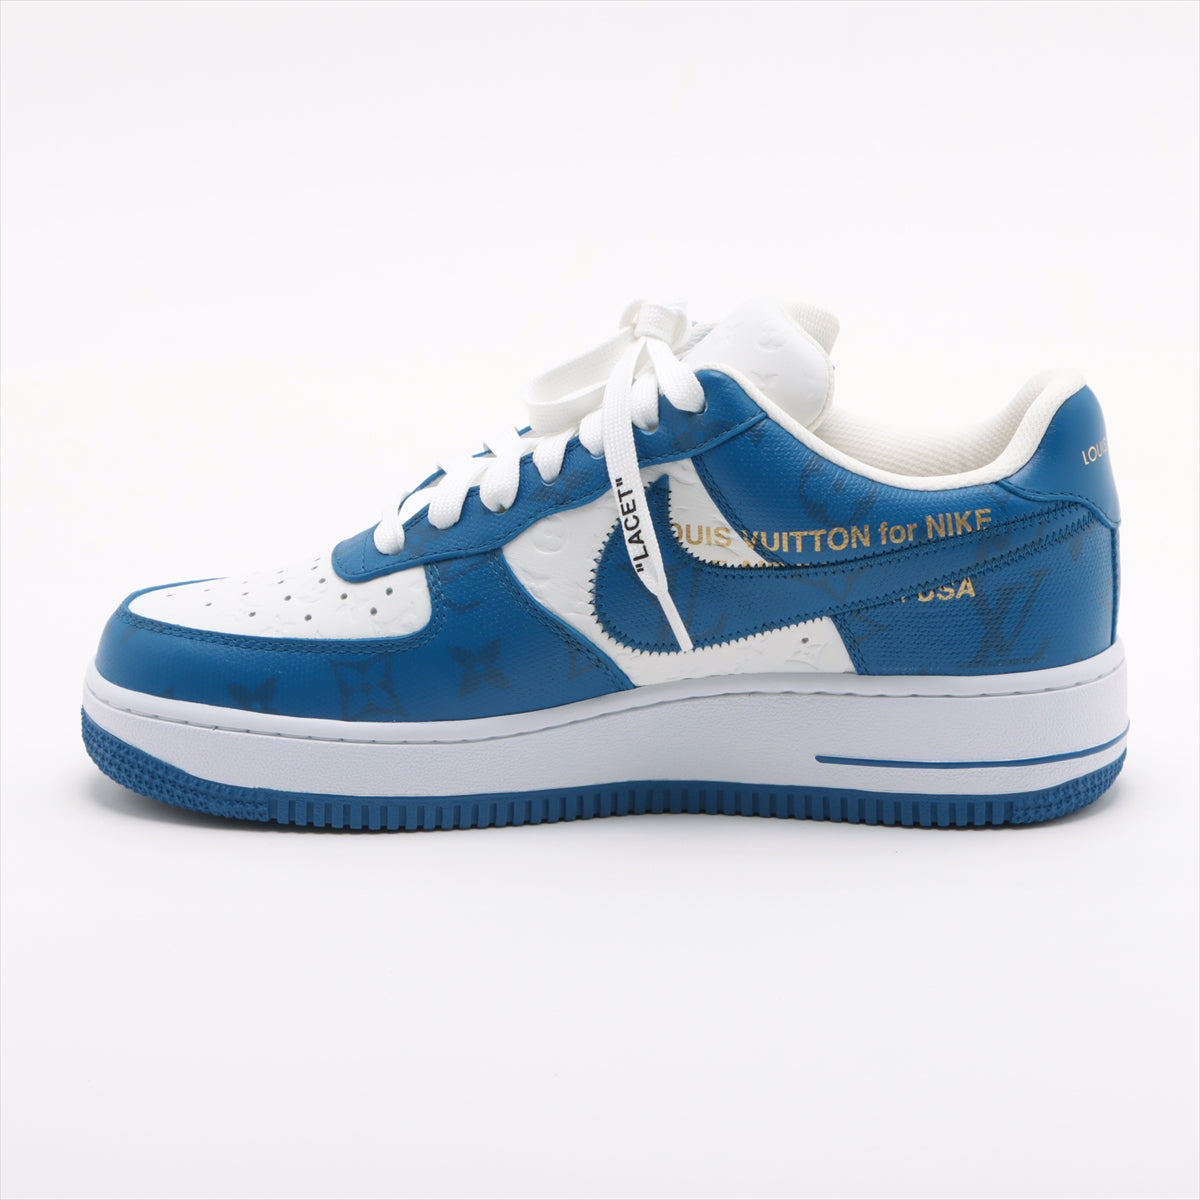 Louis Vuitton x Nike AIR FORCE 1 22 years Leather Sneakers 6 1/2 Men's Blue x white MS0232 Monogram Is there a replacement string